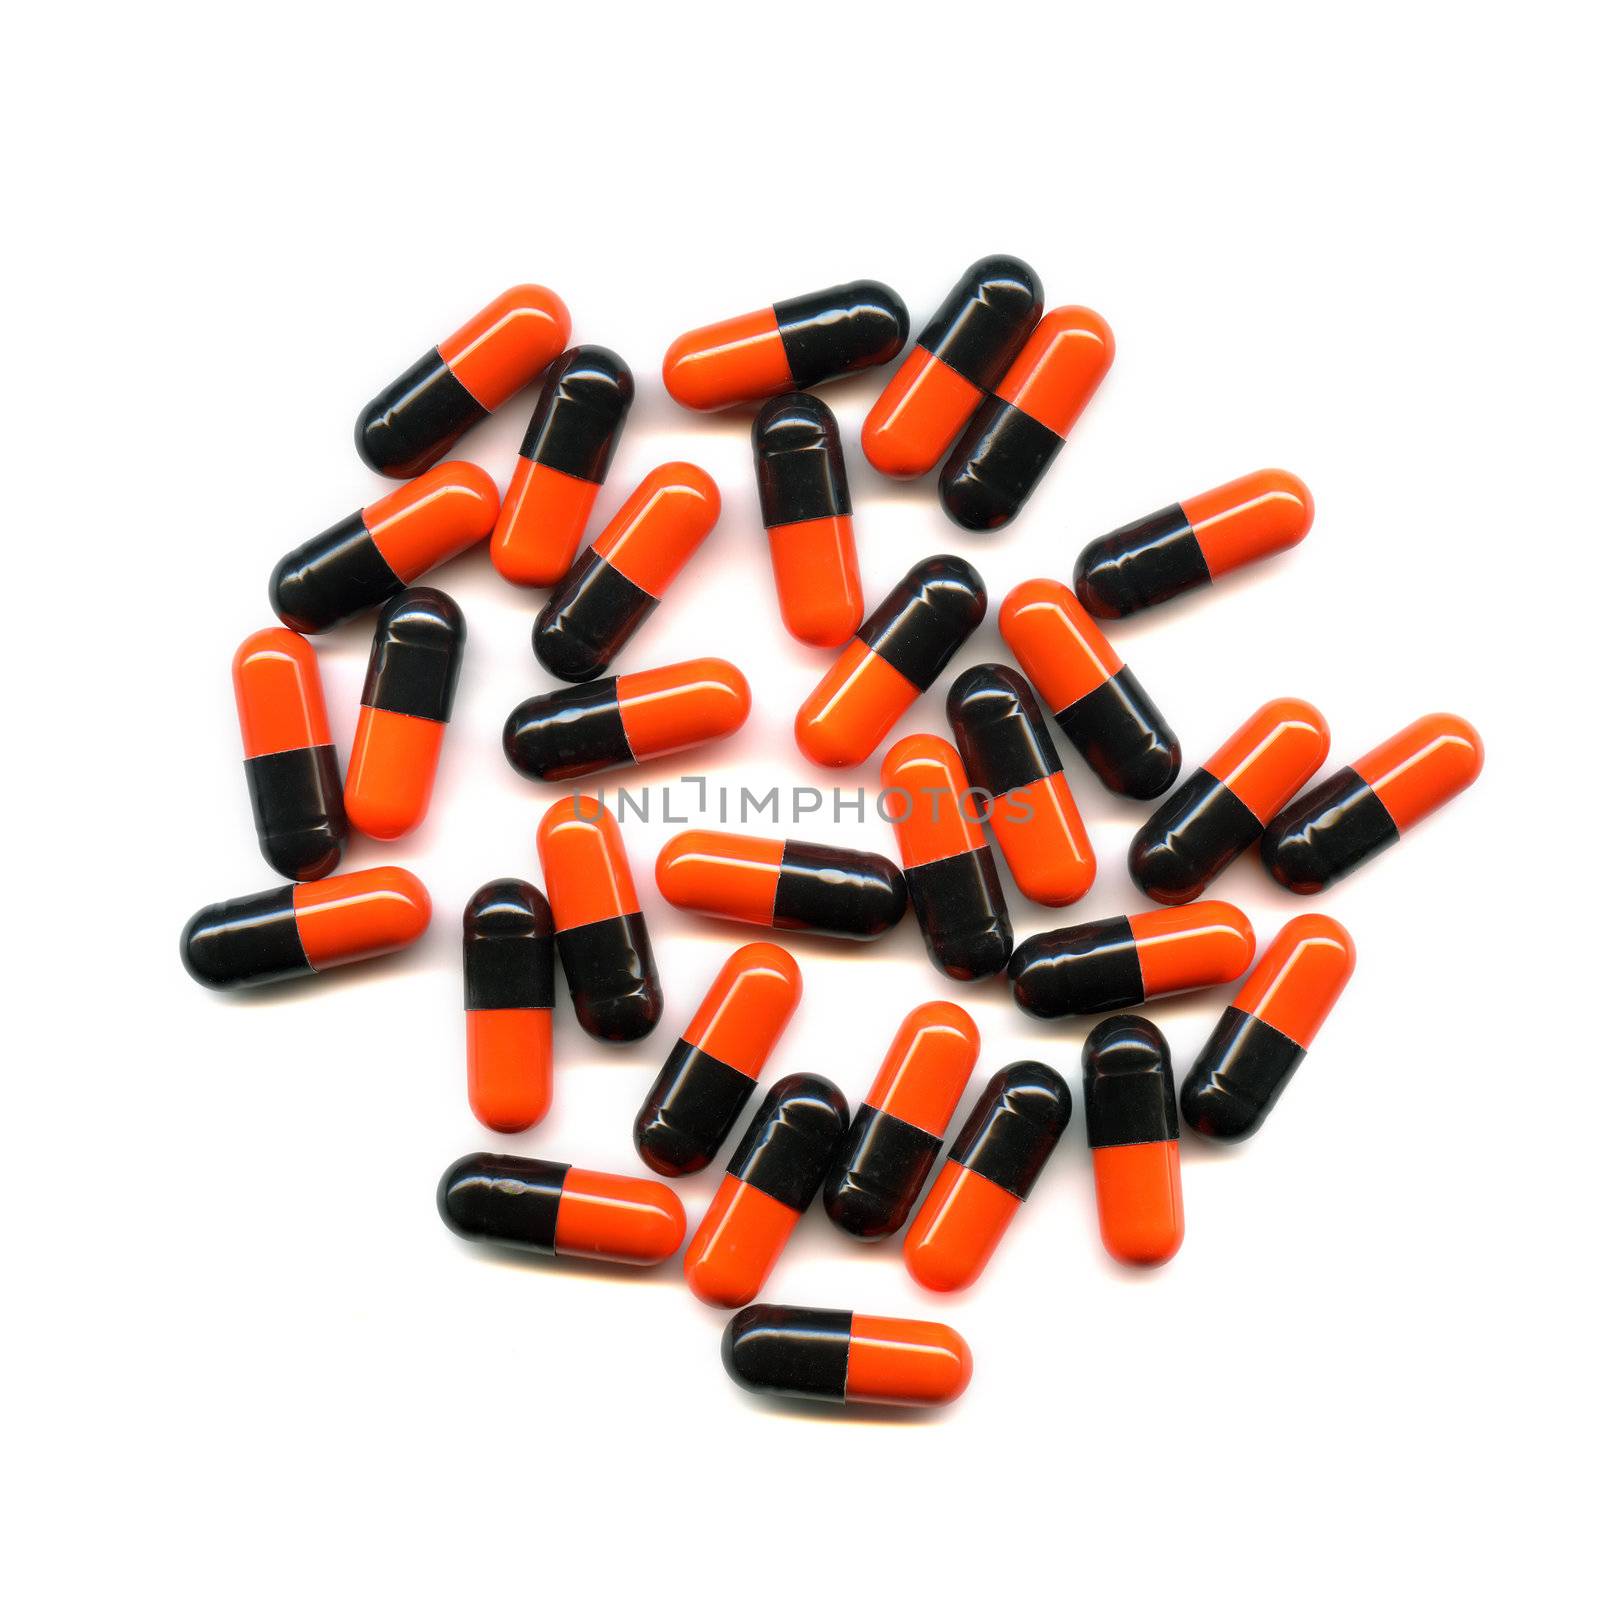 Pills over white background by Goodday